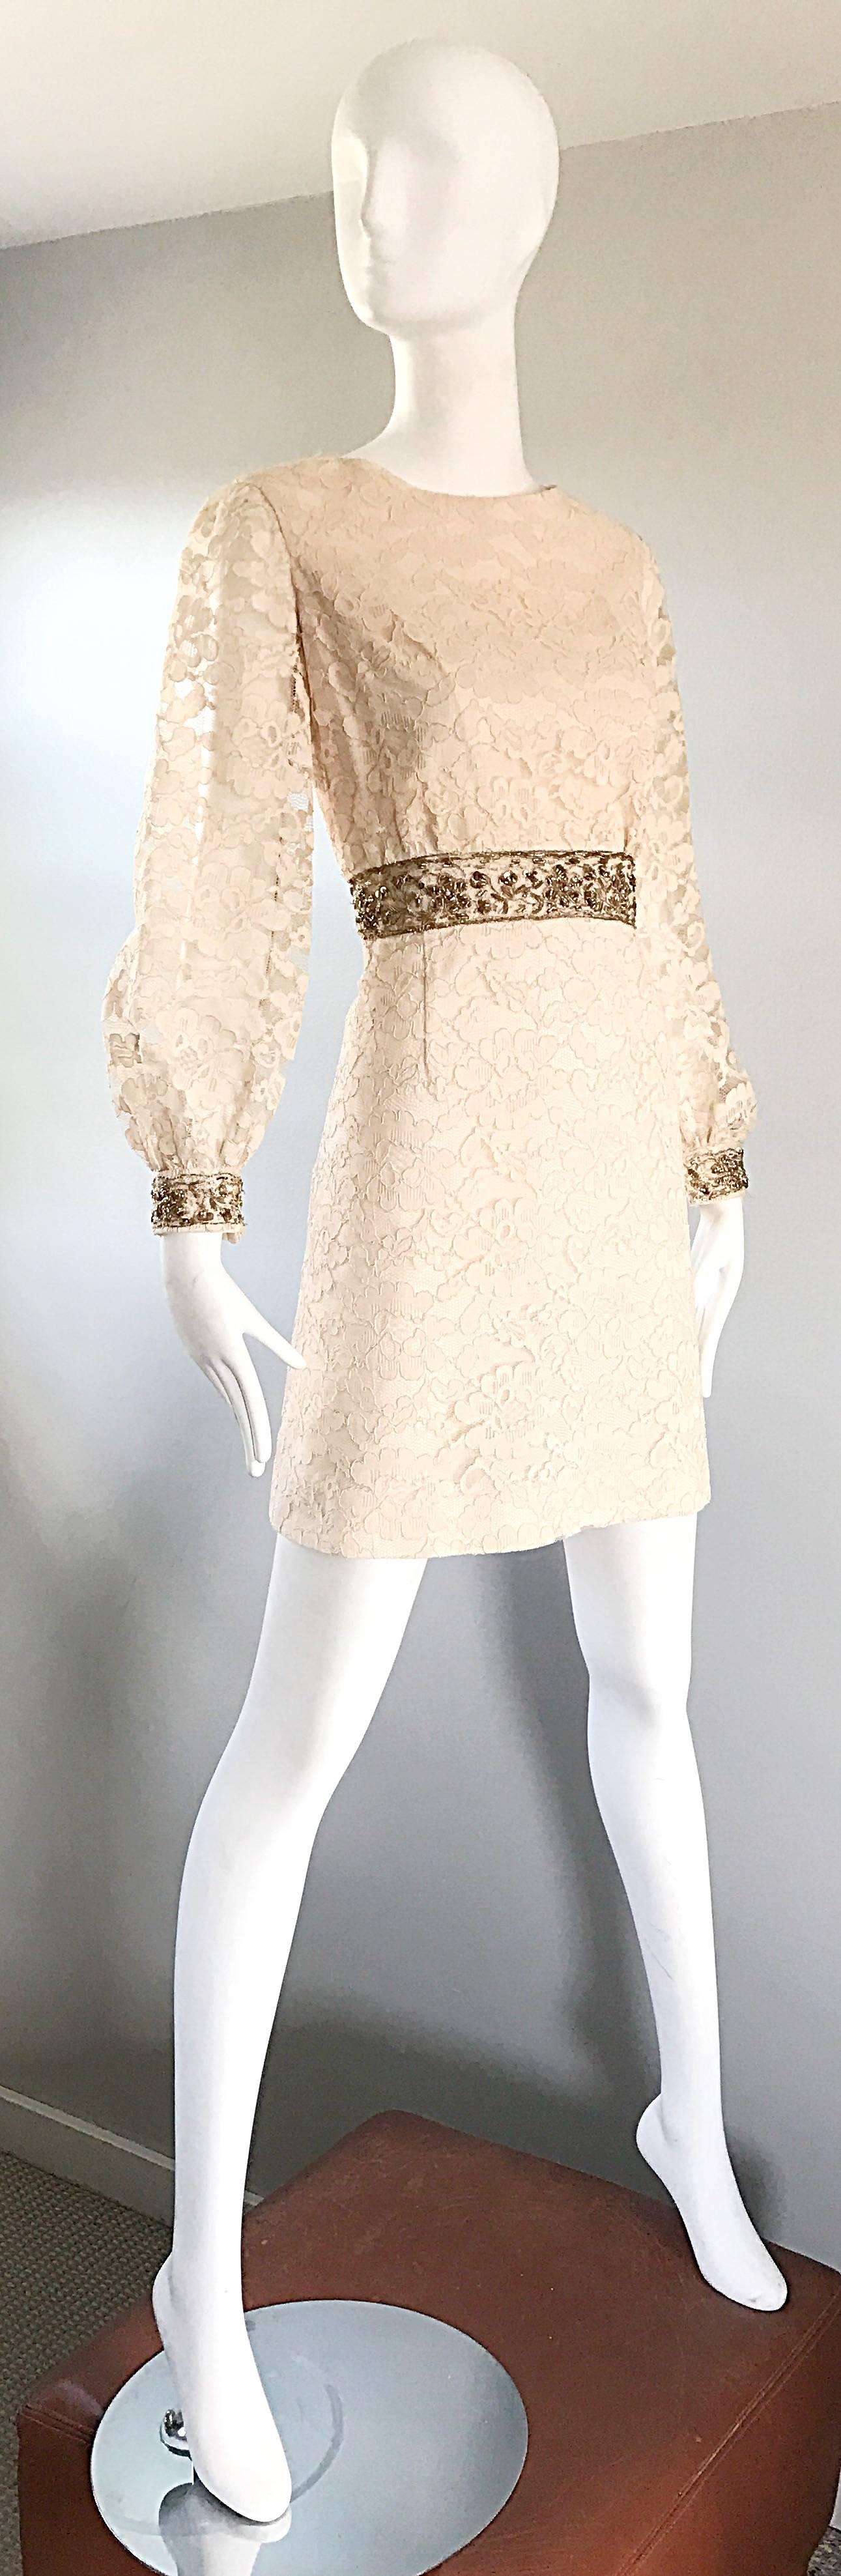 Women's 1960s Ivory and Gold Lace + Sequins Mod Vintage A - Line 60s Babydoll Dress For Sale